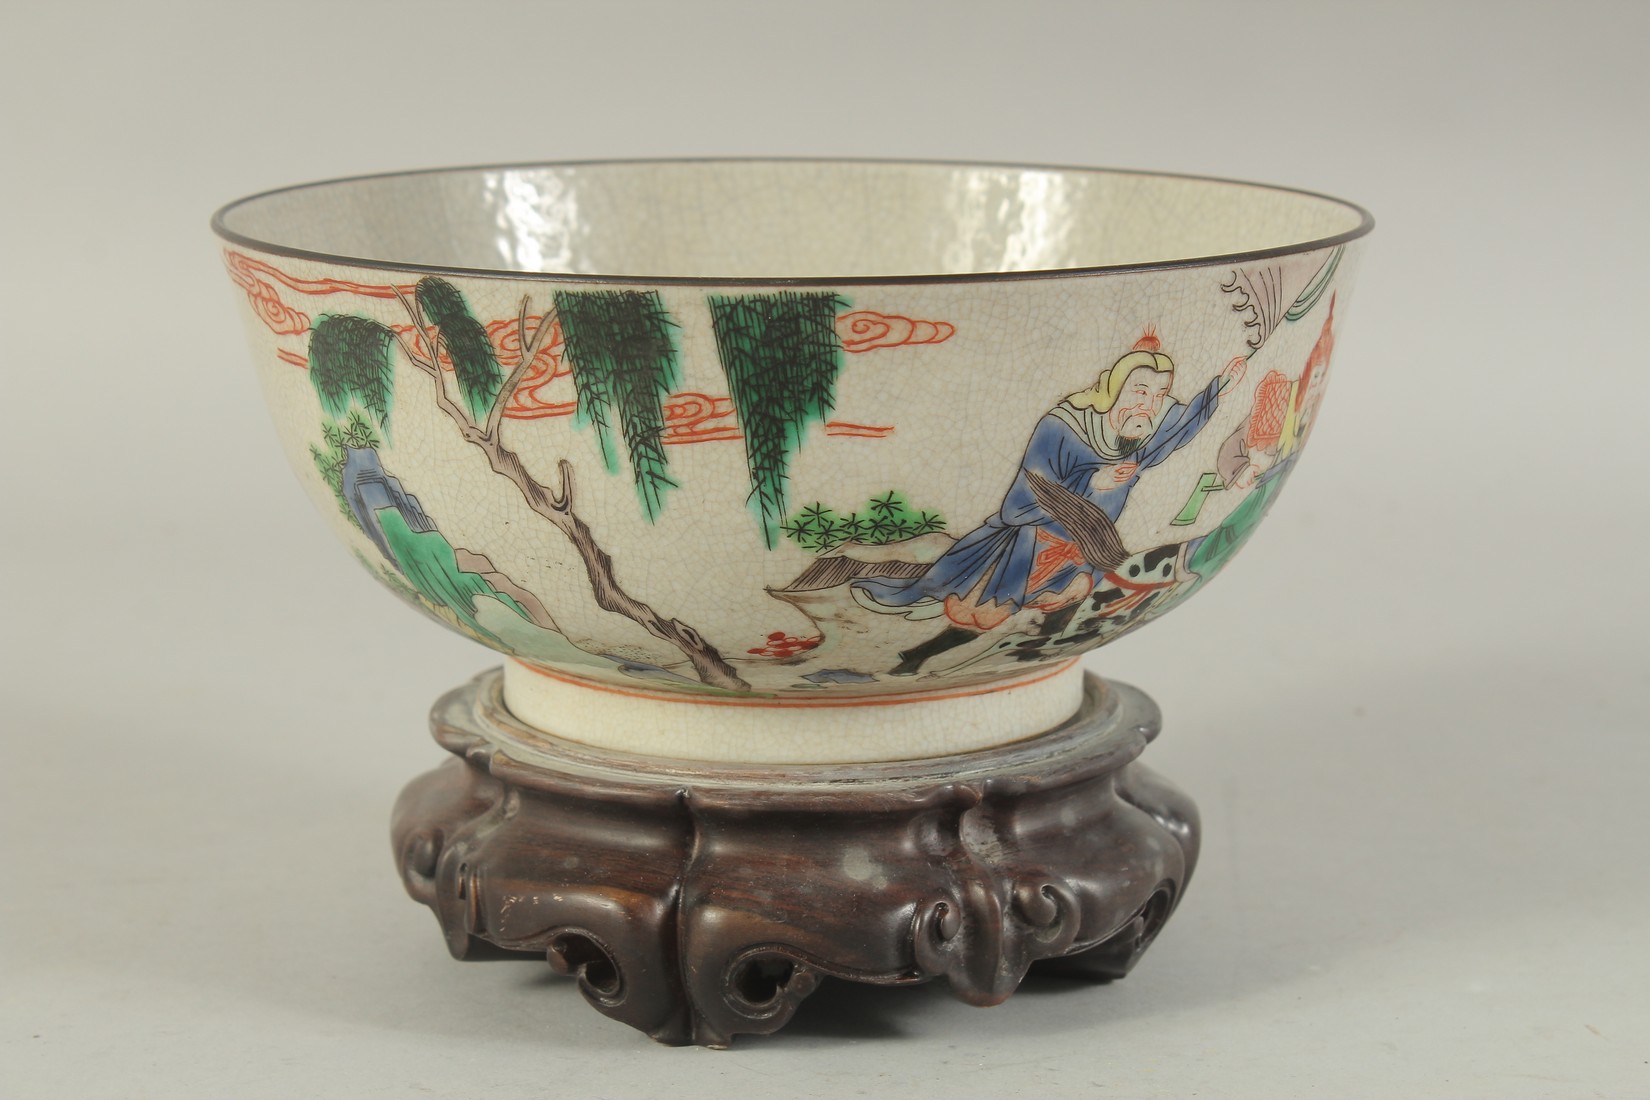 A CHINESE FAMILLE VERTE PORCELAIN BOWL - possibly Qing dynasty, with hardwood stand, the exterior